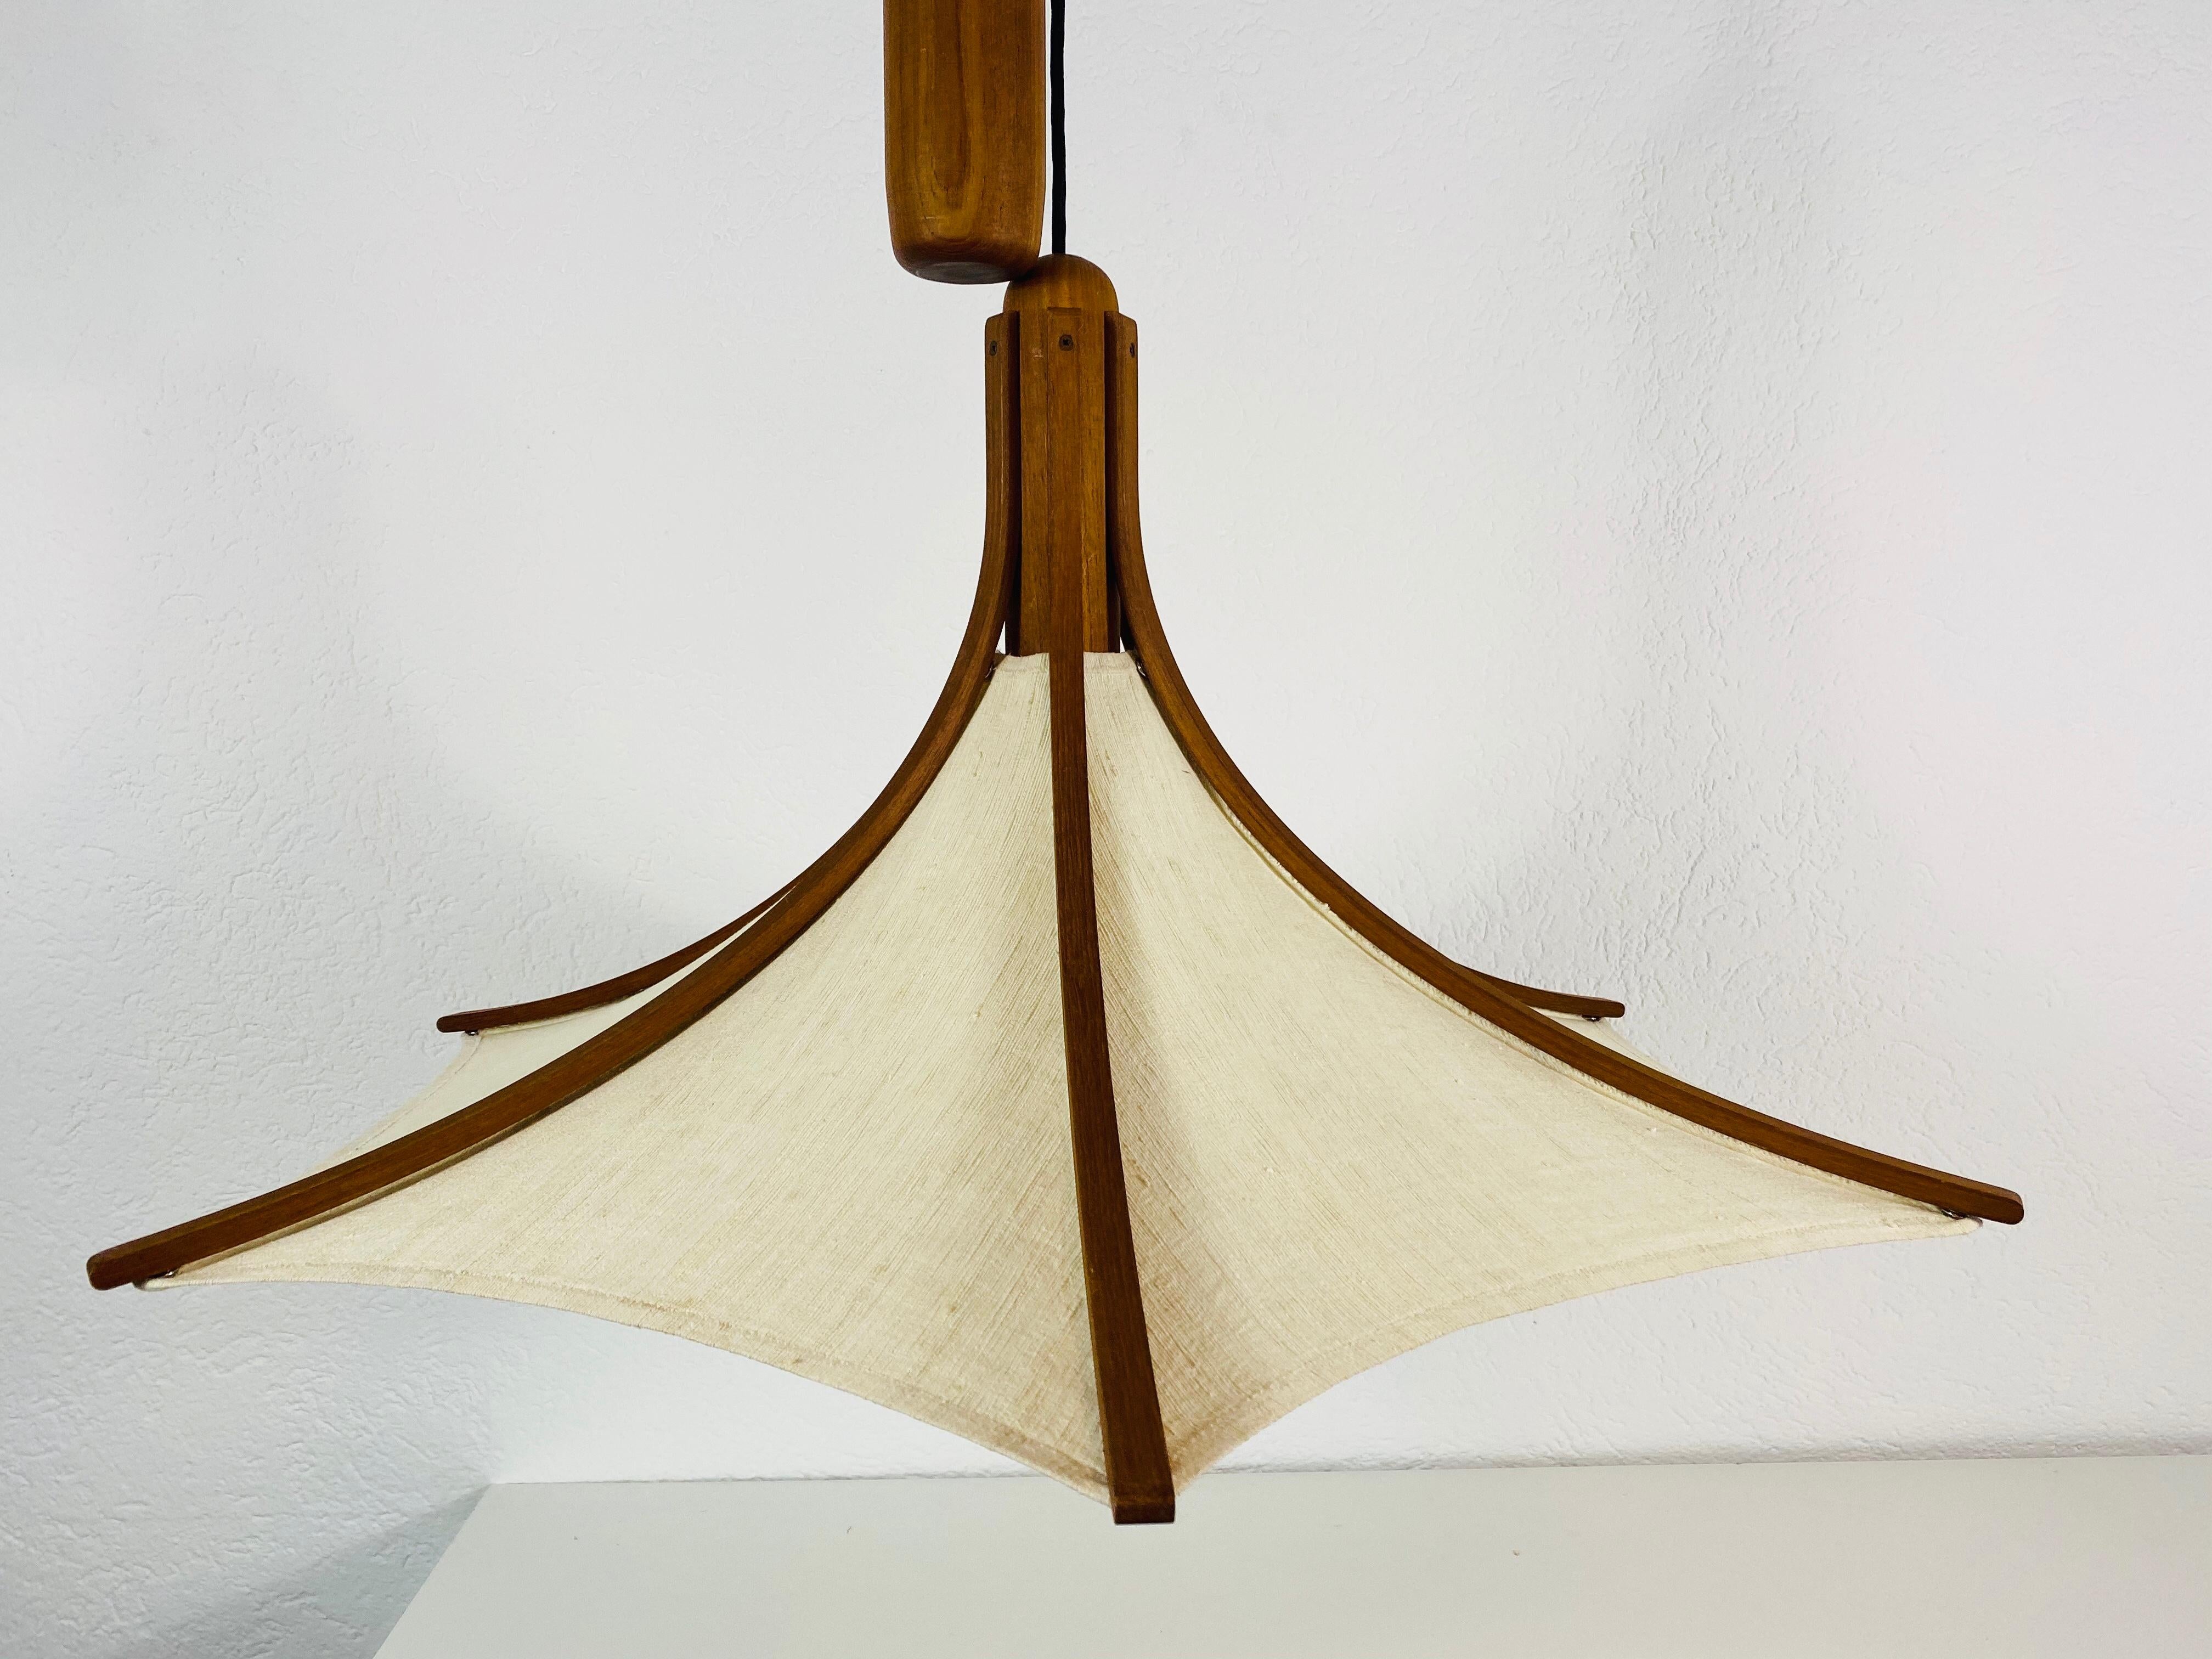 Textile Adjustable Midcentury Wooden Pendant Lamp with Counterweight by Domus, 1960s